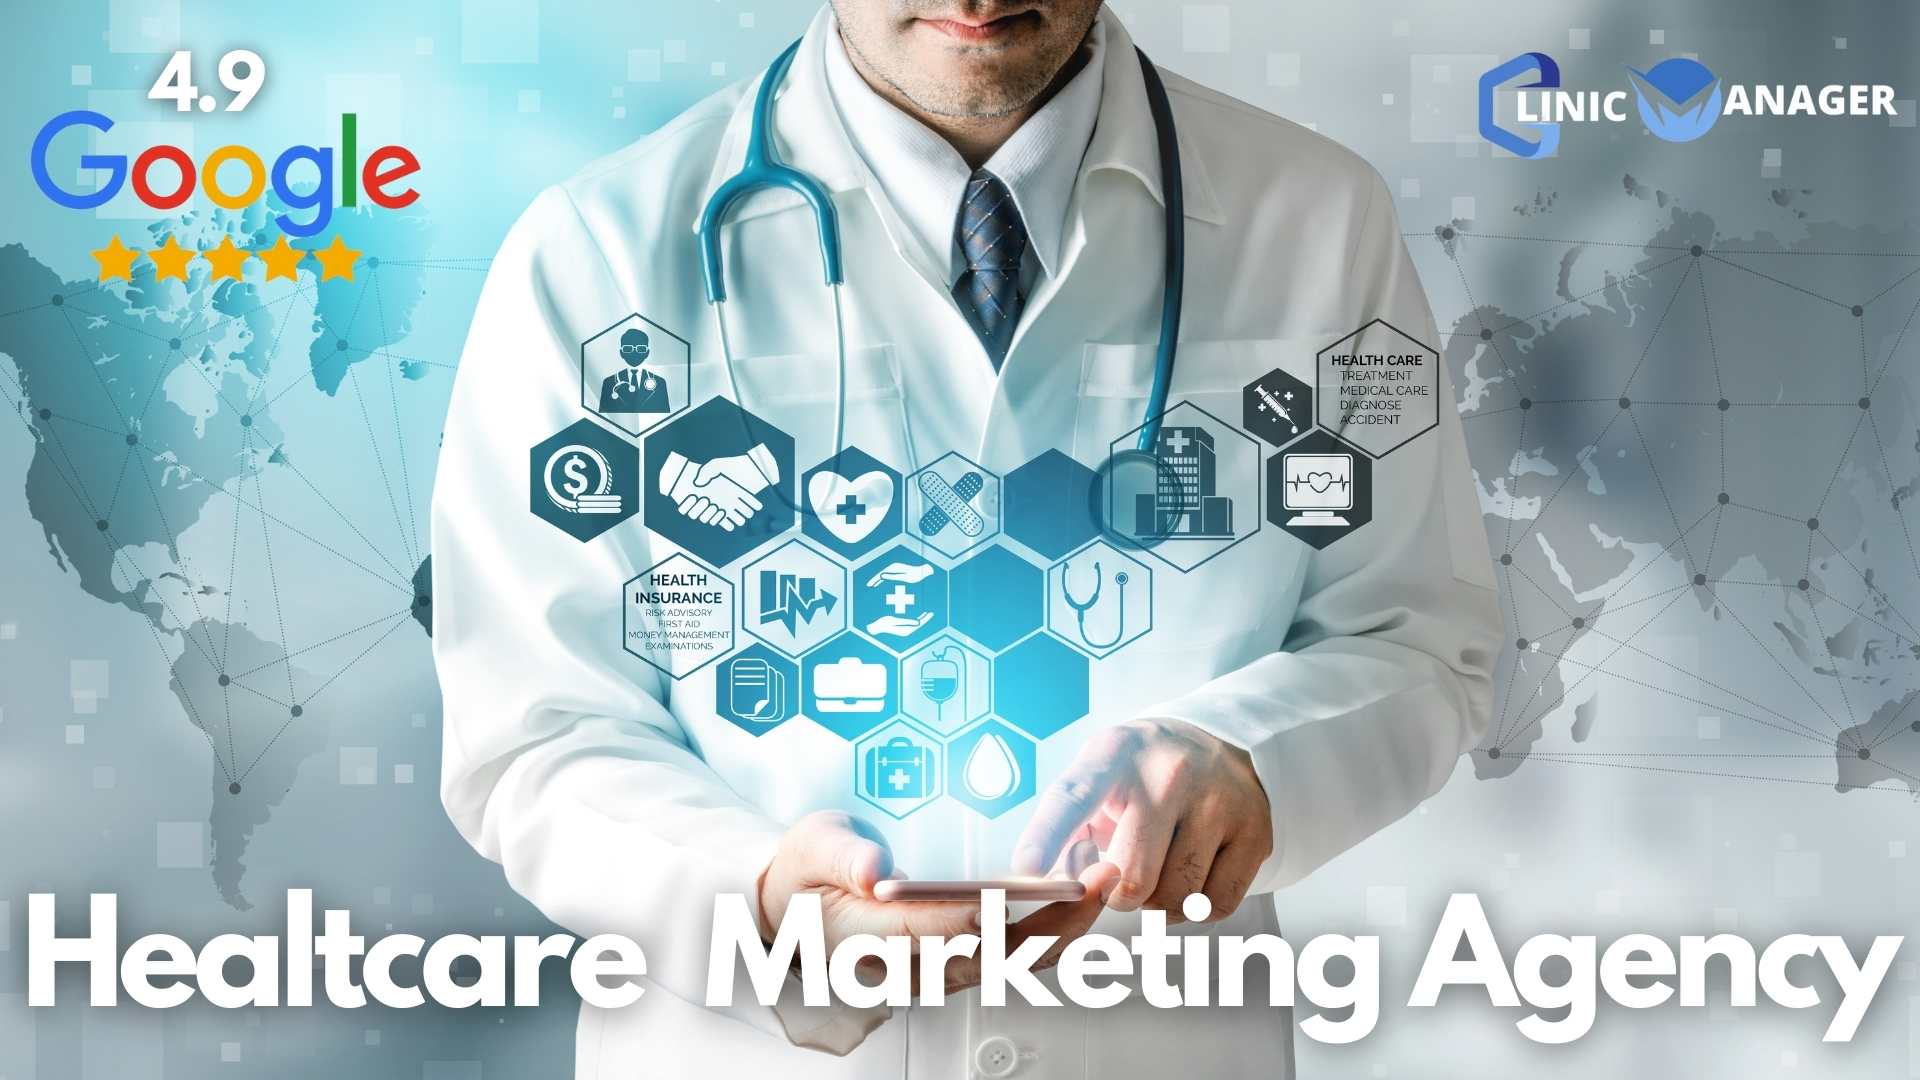 Healthcare Marketing Agency In Delhi | 100% Results With 125+ Partner Doctors, Clinics And Hospitals  - ClinicManager™